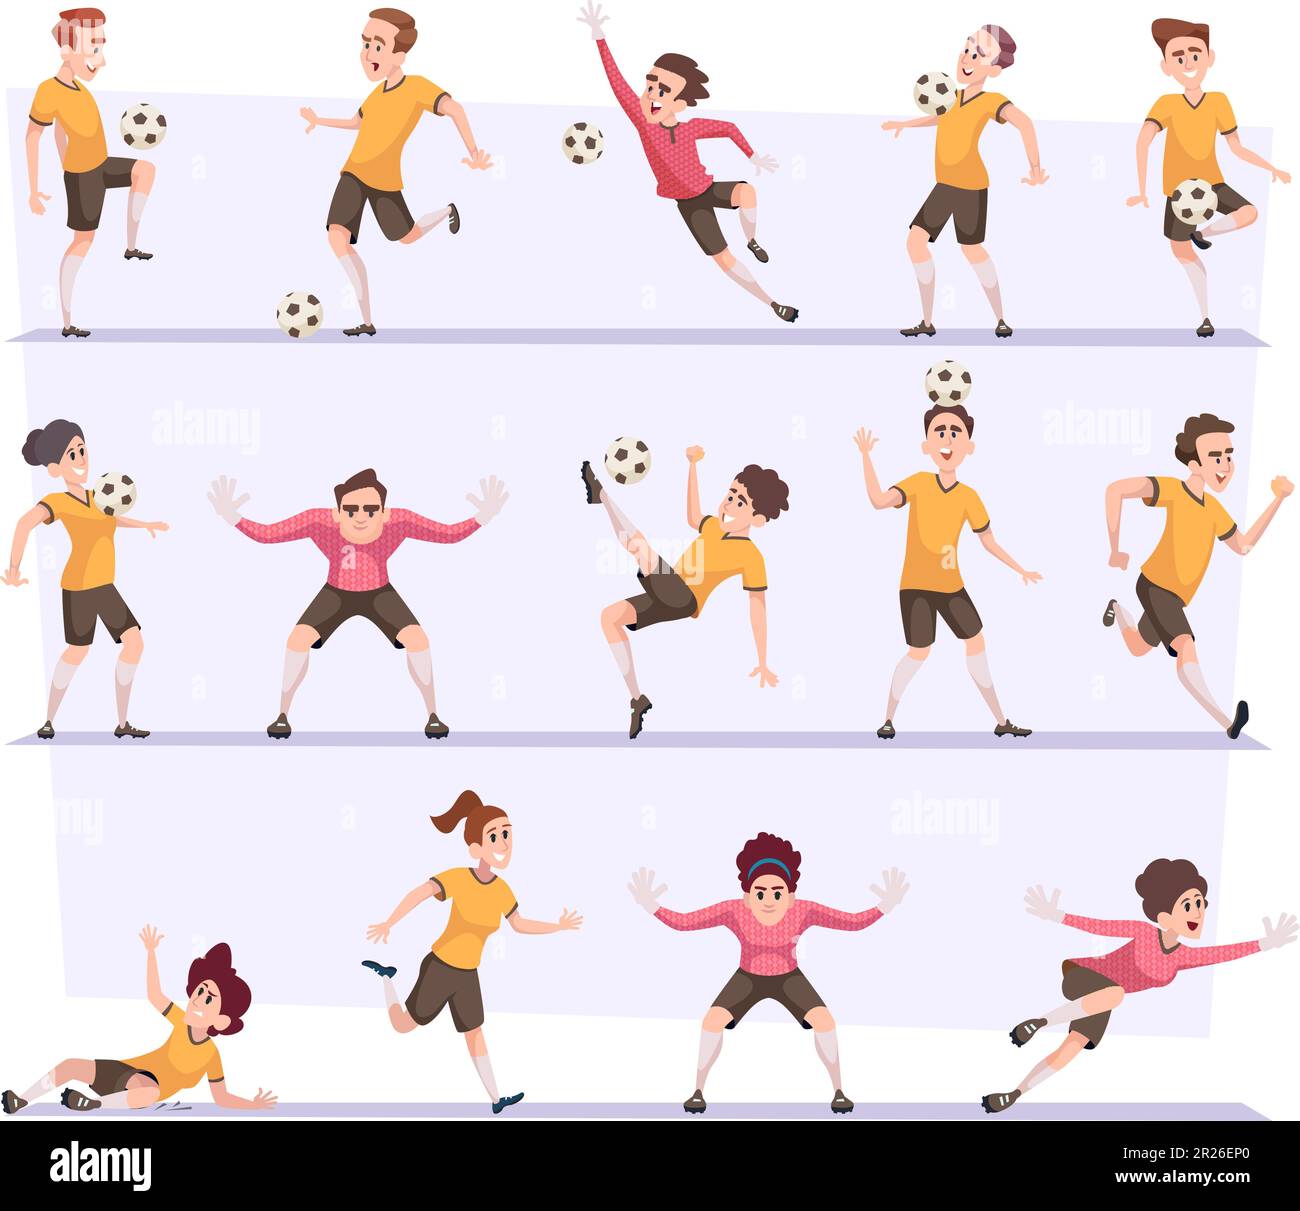 Sport Banners Olympic Games Athletes In Action Poses Gymnastic Jumpers  Runners Soccer Players Vector Isometric People Stock Illustration -  Download Image Now - iStock